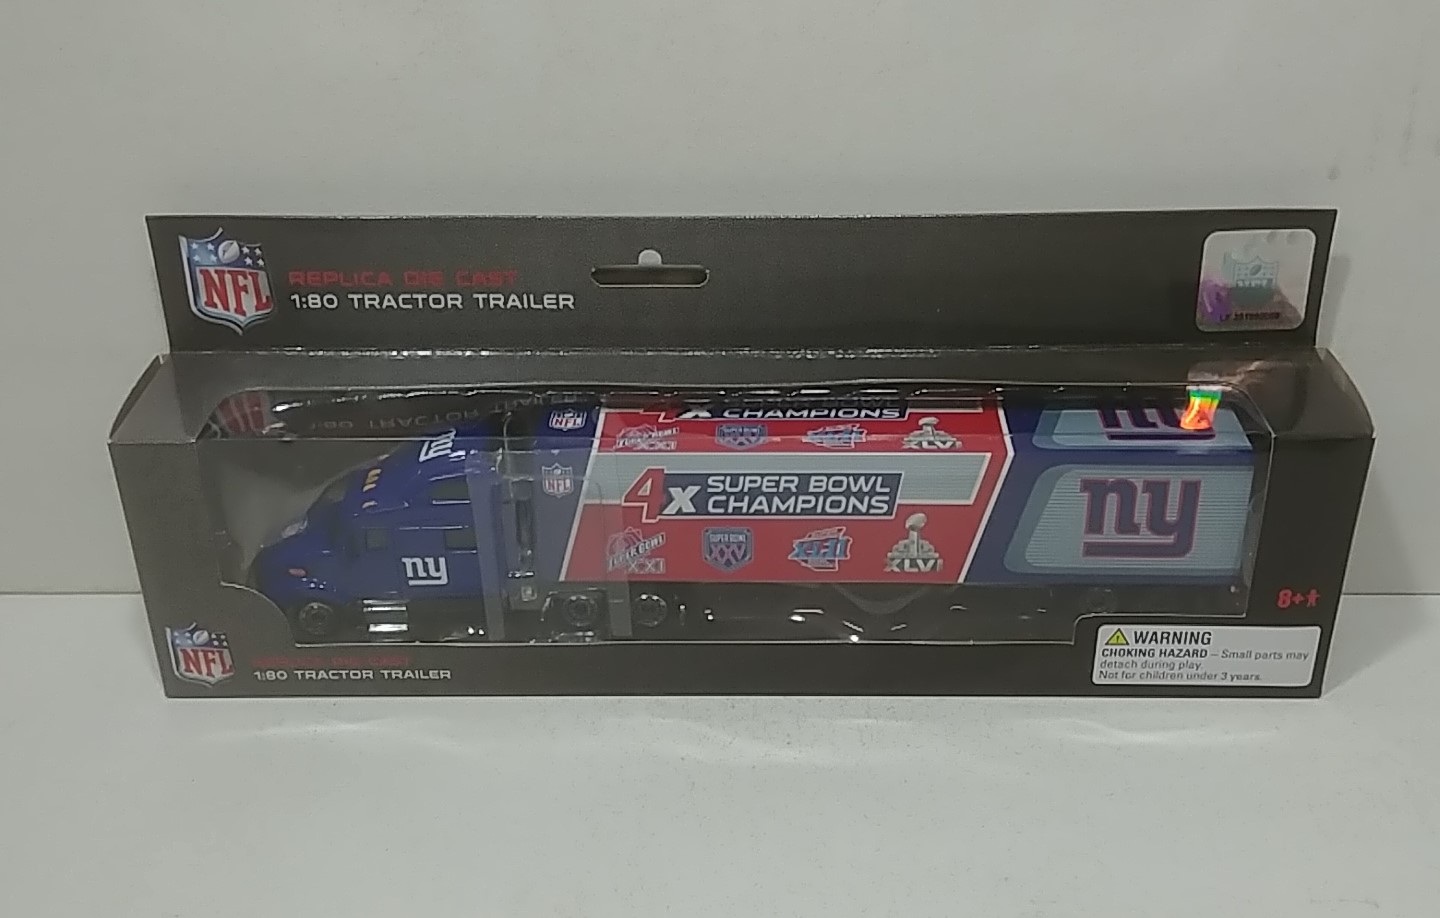 2012 NY Giants 1/80th "4-Time Super Bowl Champions" Transporter